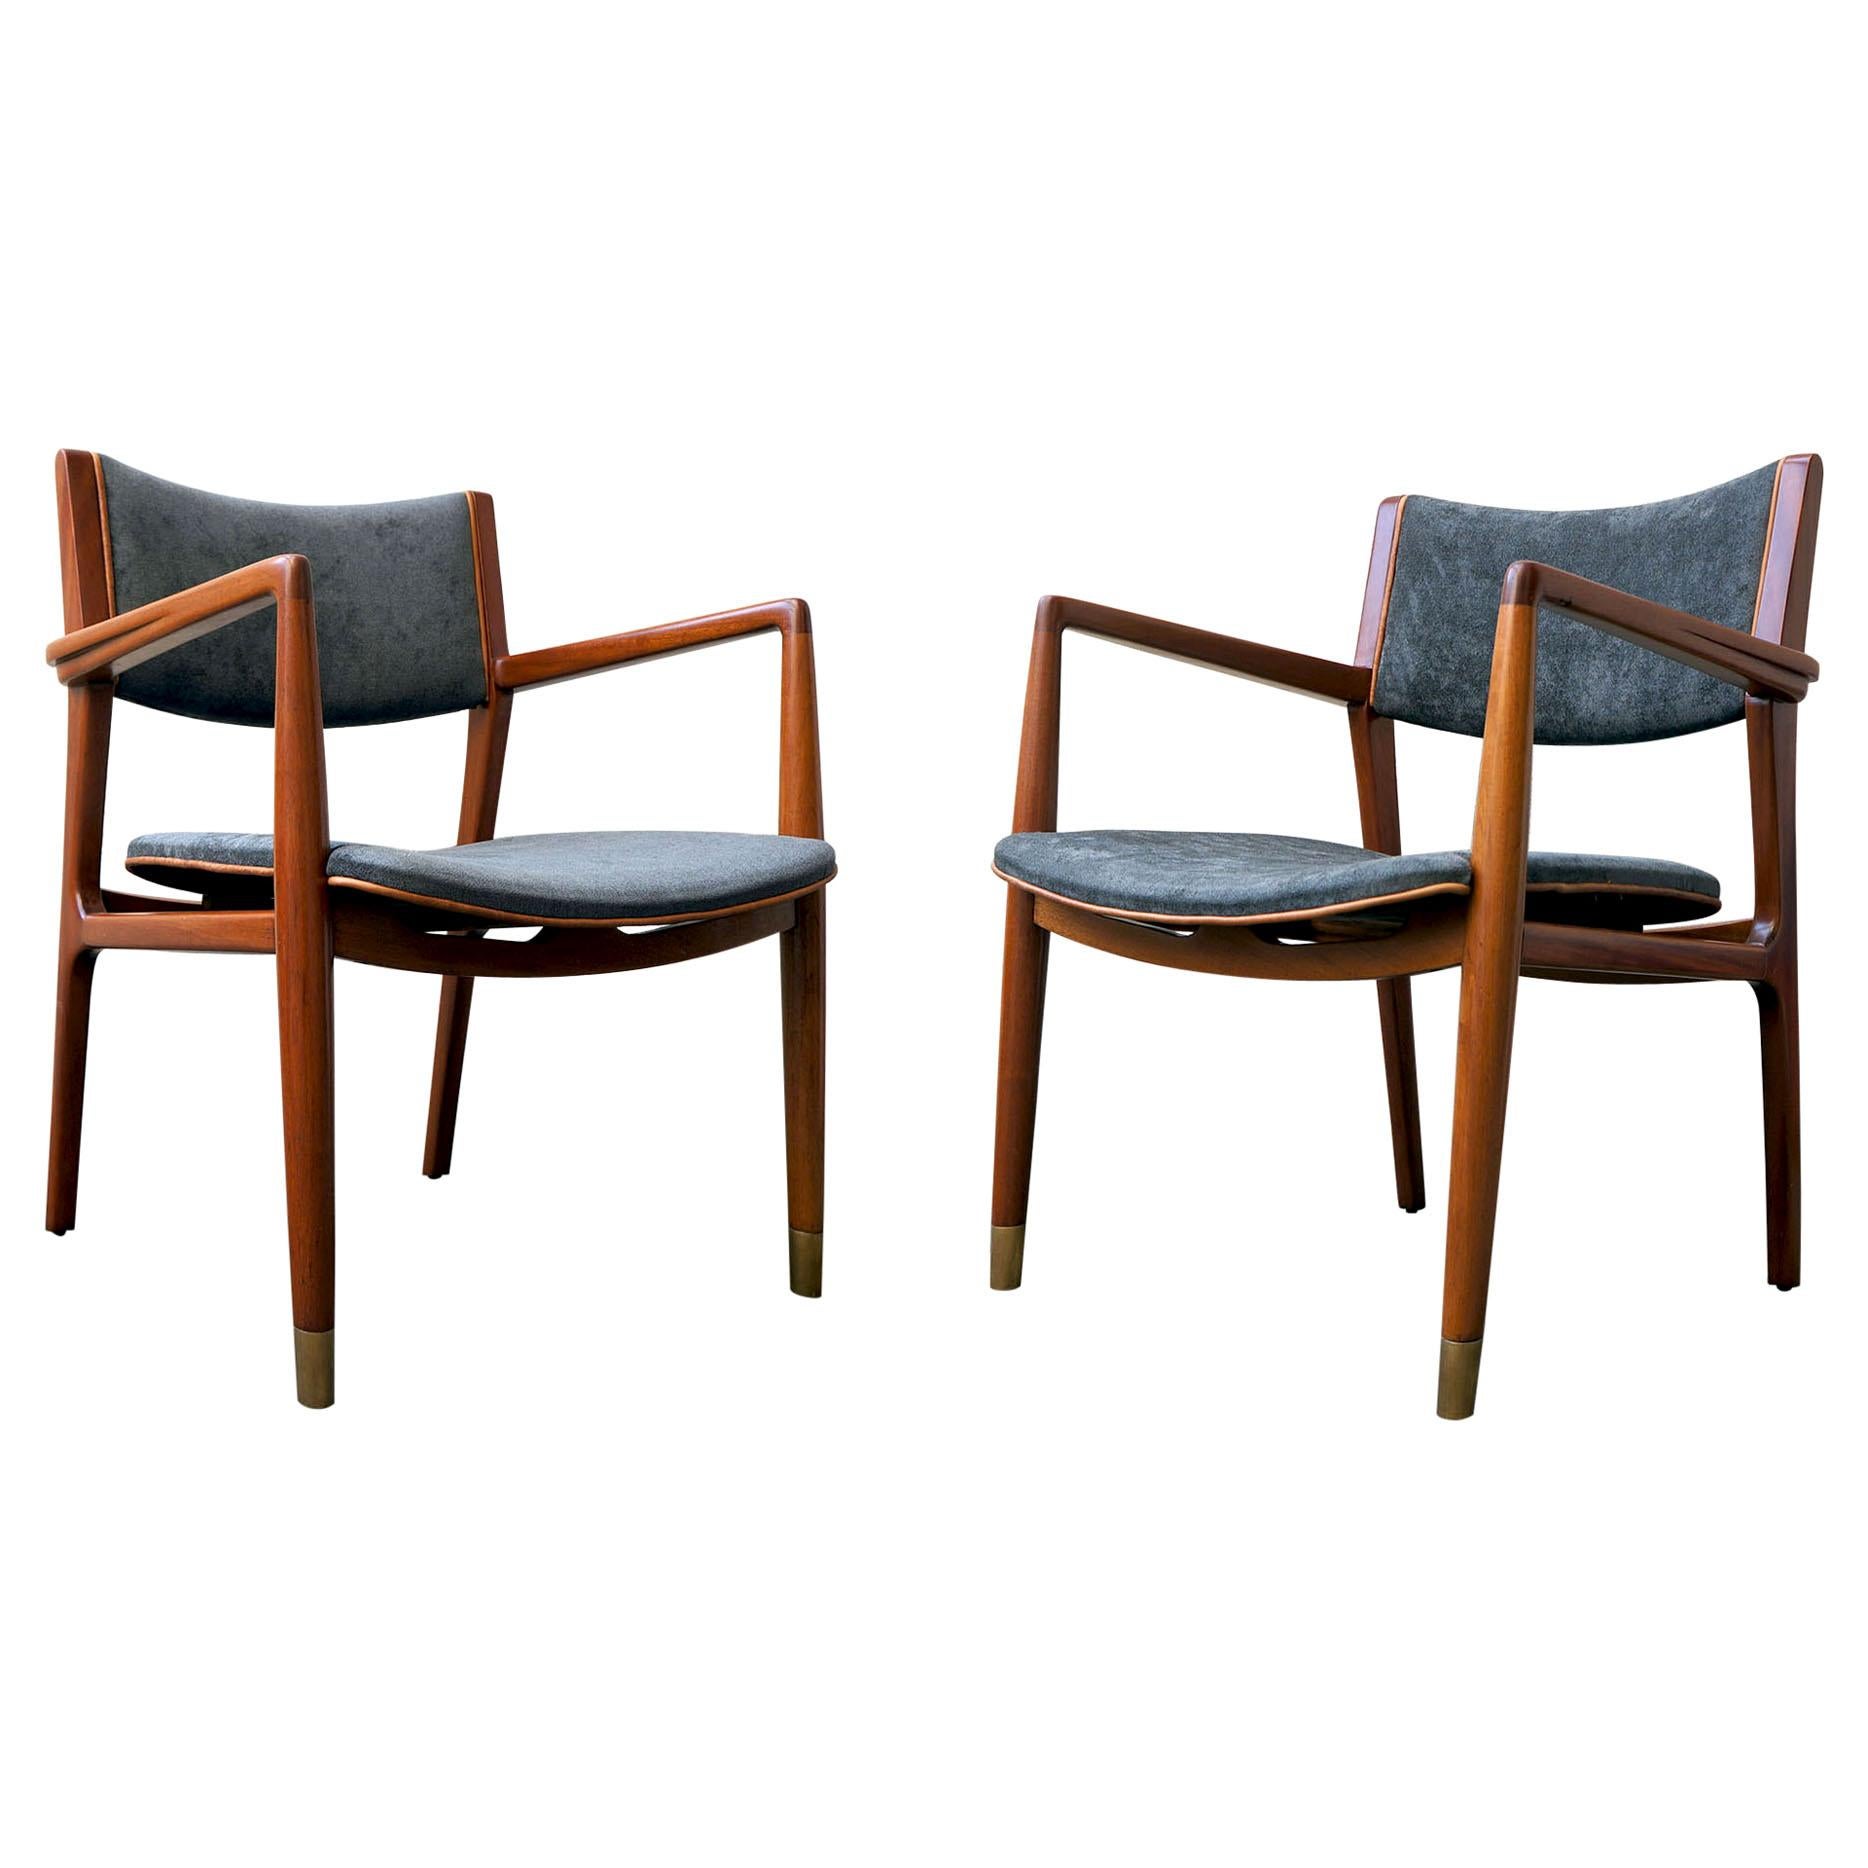 Pair of Mexican Midcentury Lounge Chairs